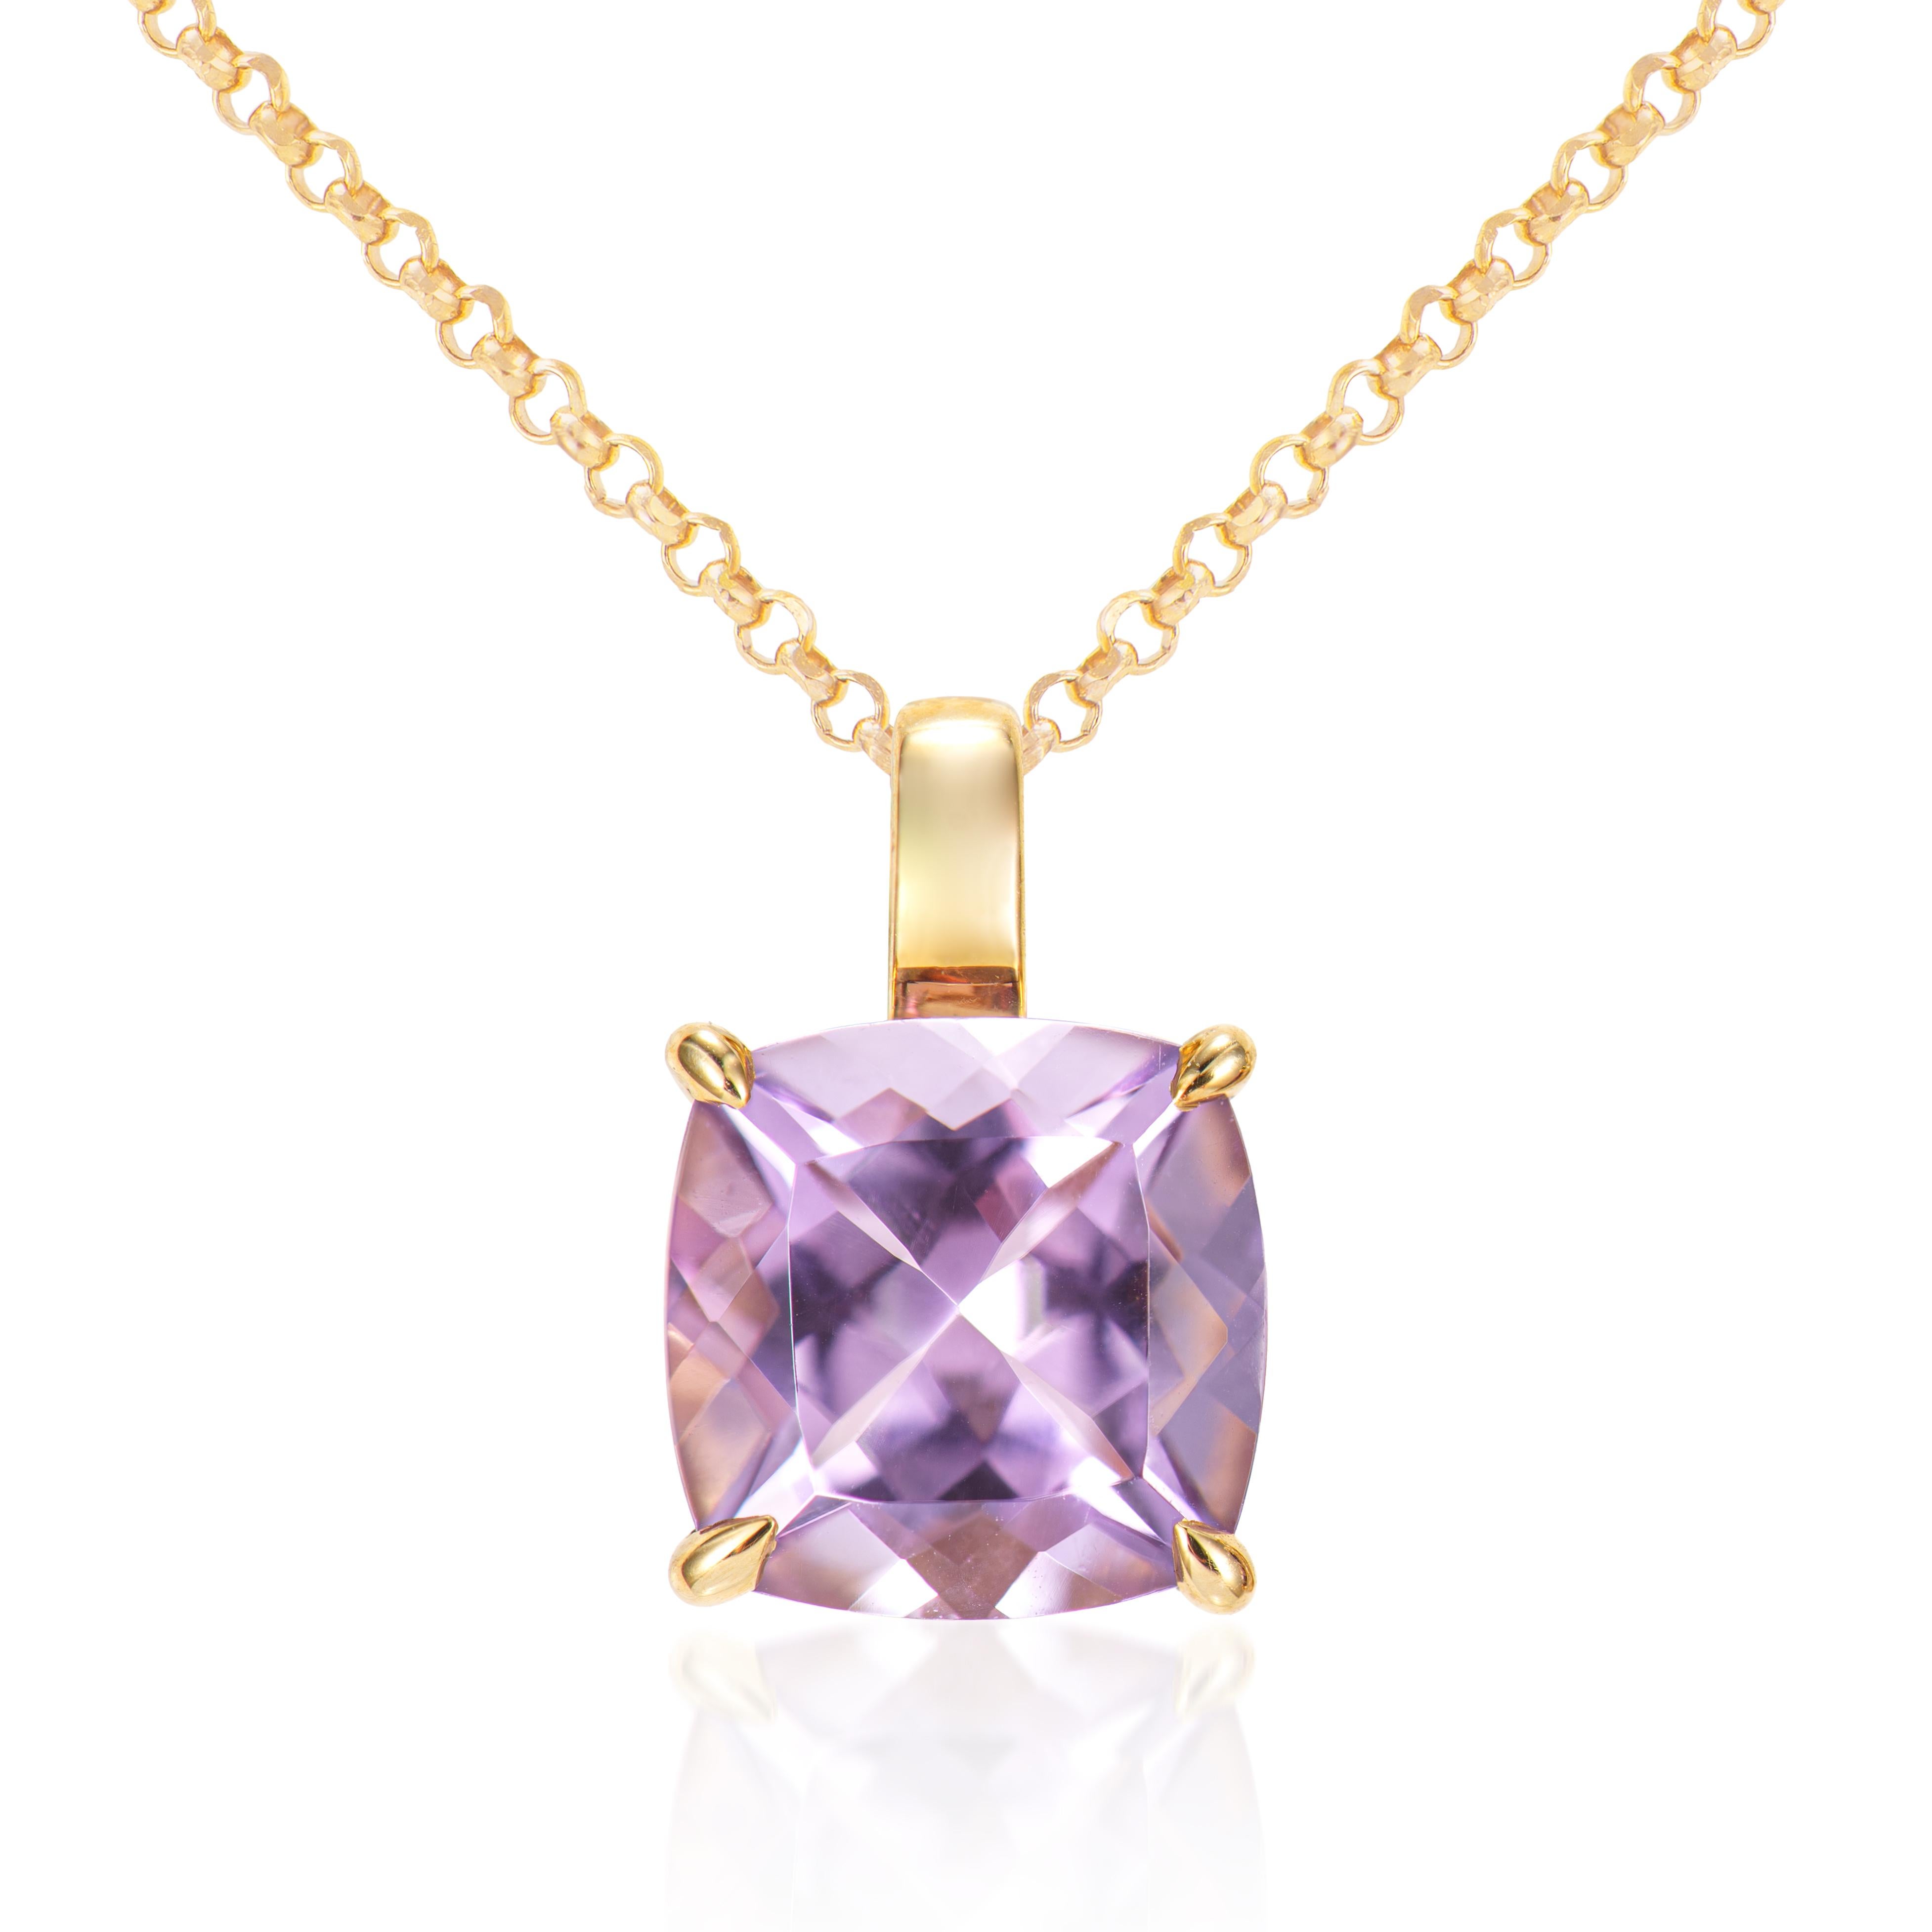 Presented A lovely collection of gems, including Amethyst, Sky Blue Topaz and Swiss Blue Topaz is perfect for people who value quality and want to wear it to any occasion or celebration. The yellow gold Amethyst pendant offer a classic yet elegant